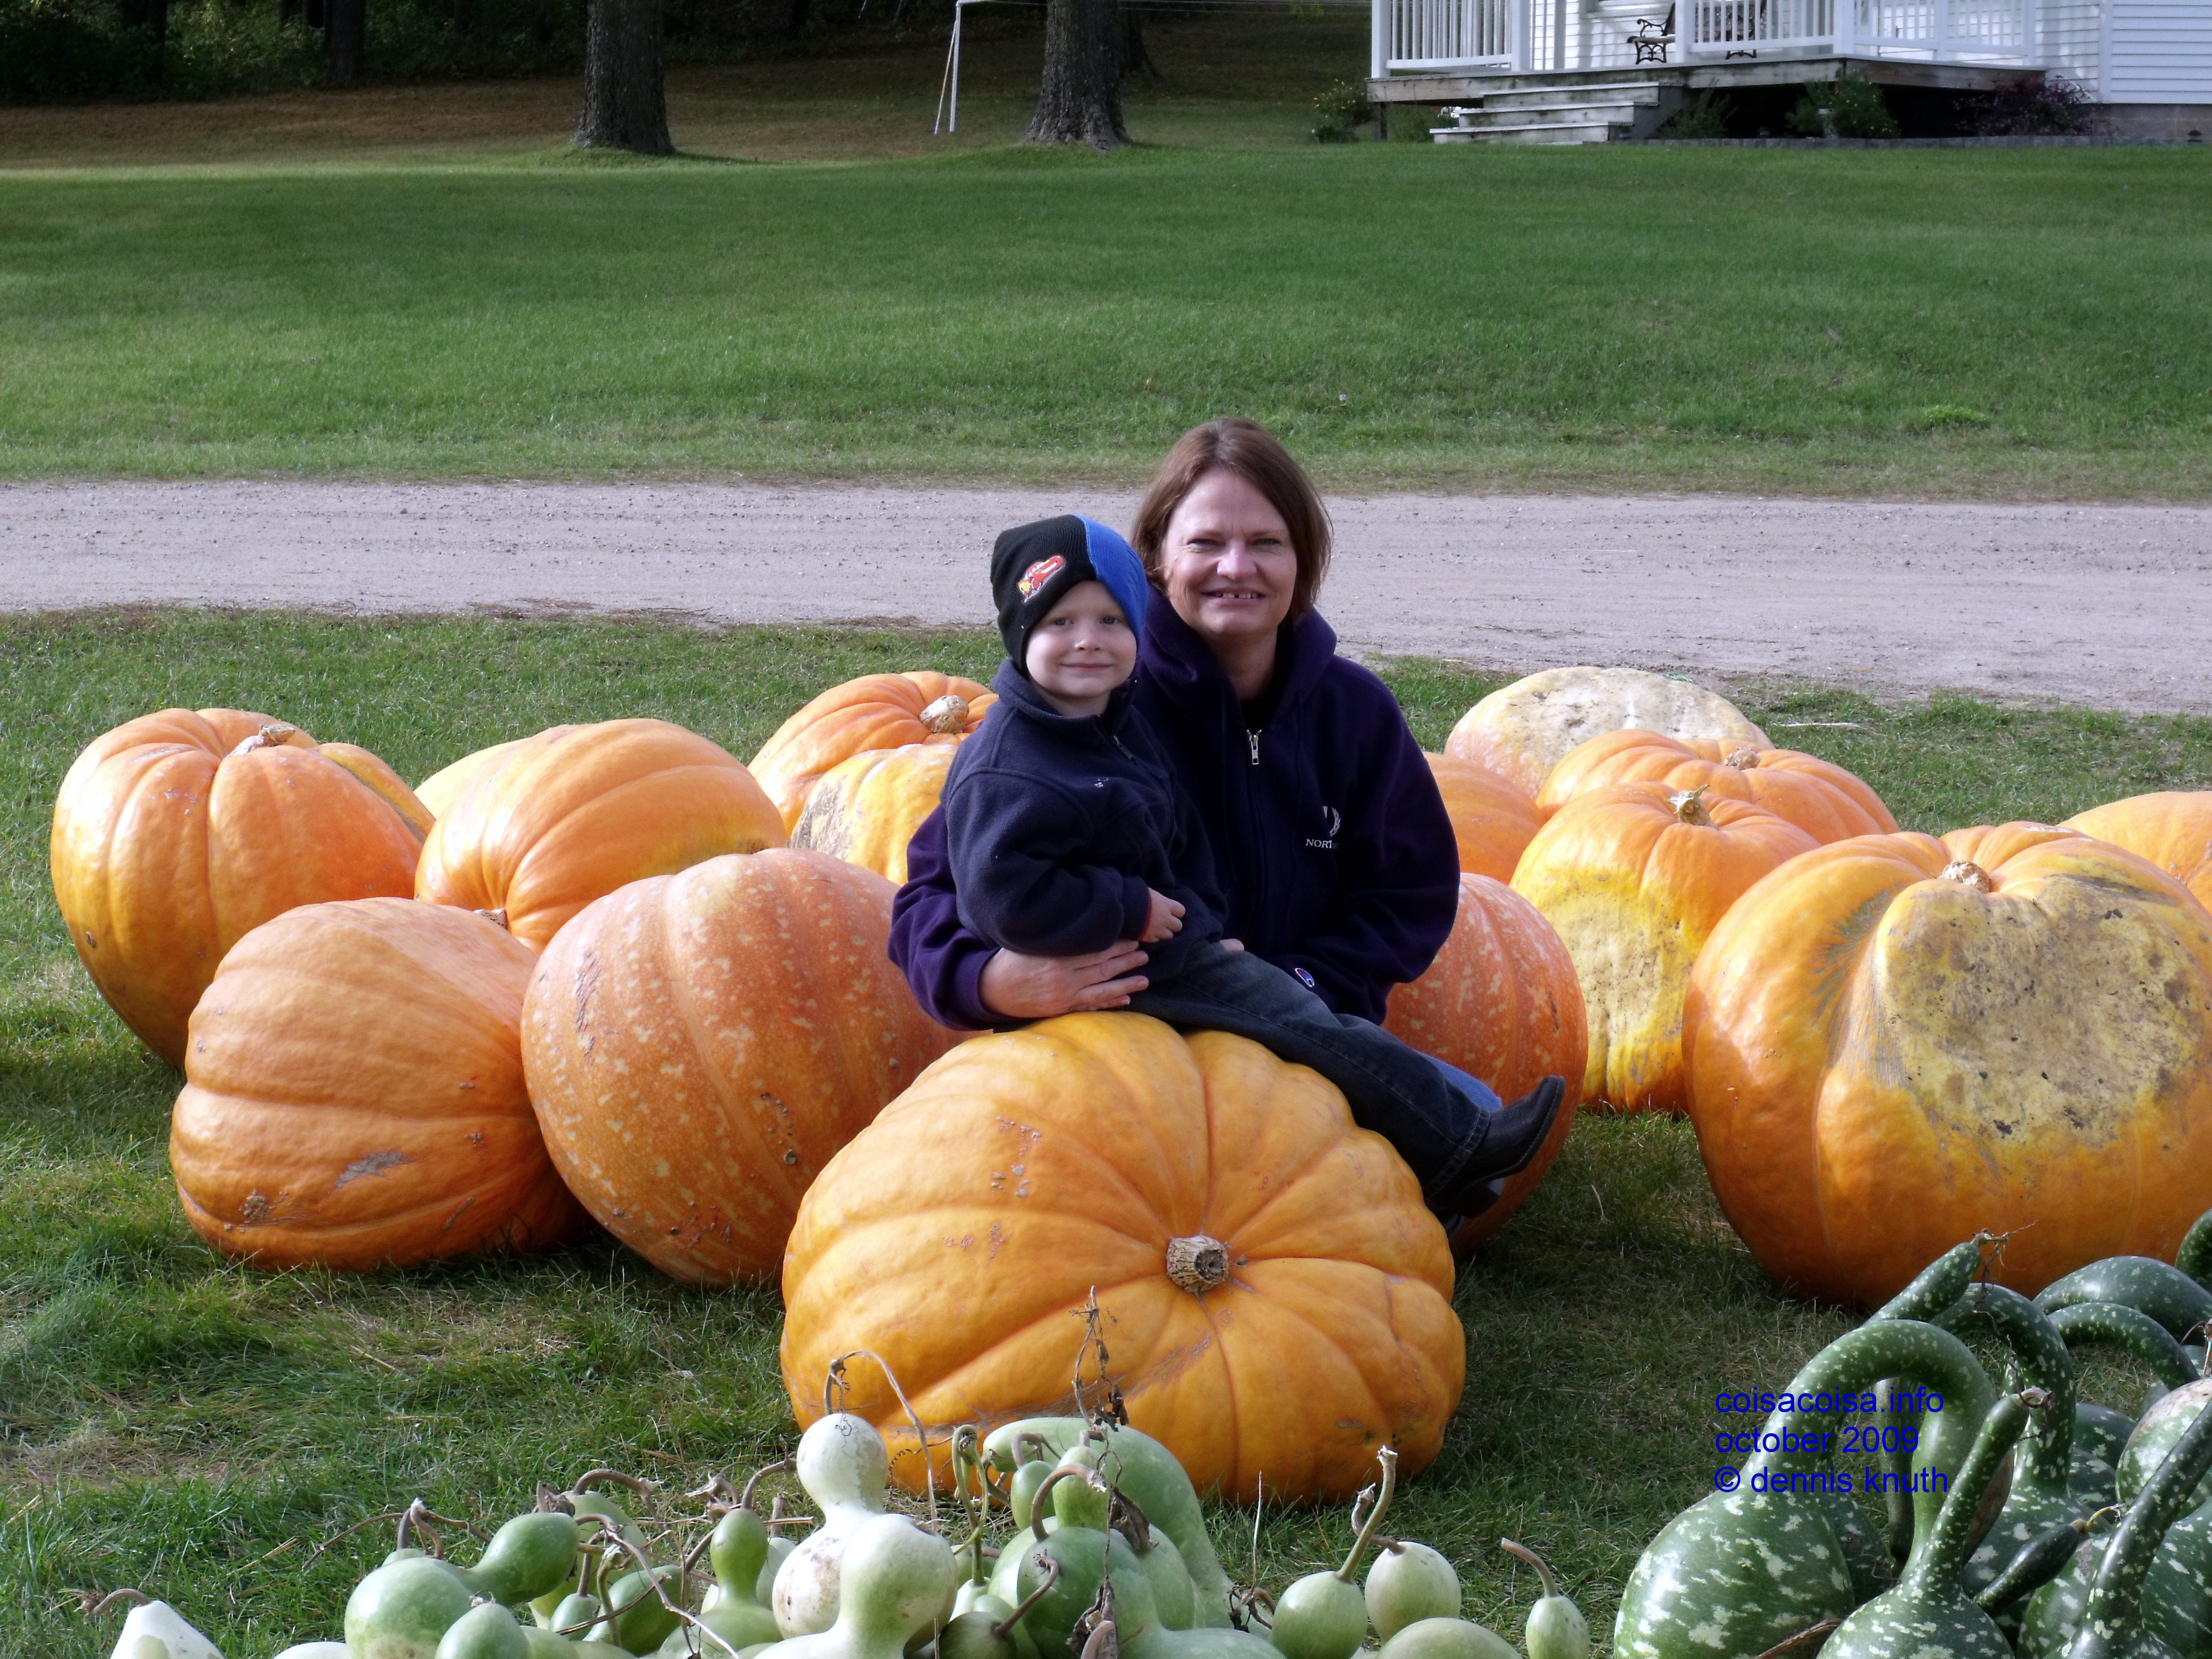 The GREAT PUMPKINs with Sherri and Gary